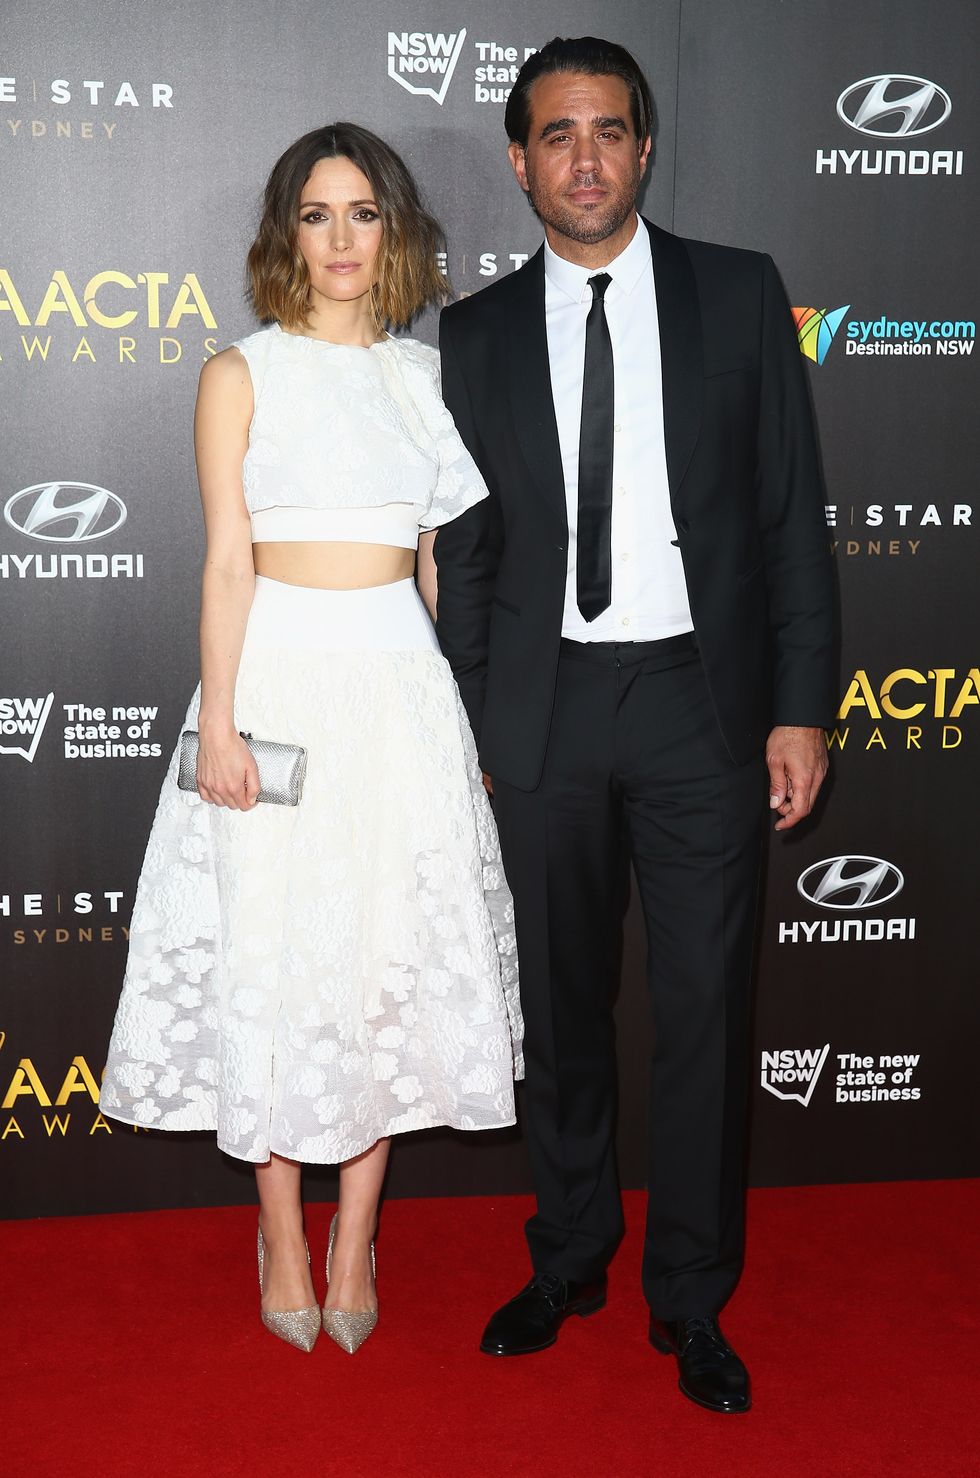 Rose Byrne on the red carpet with husband Bobby Cannavale at the 2015 AACTA Awards